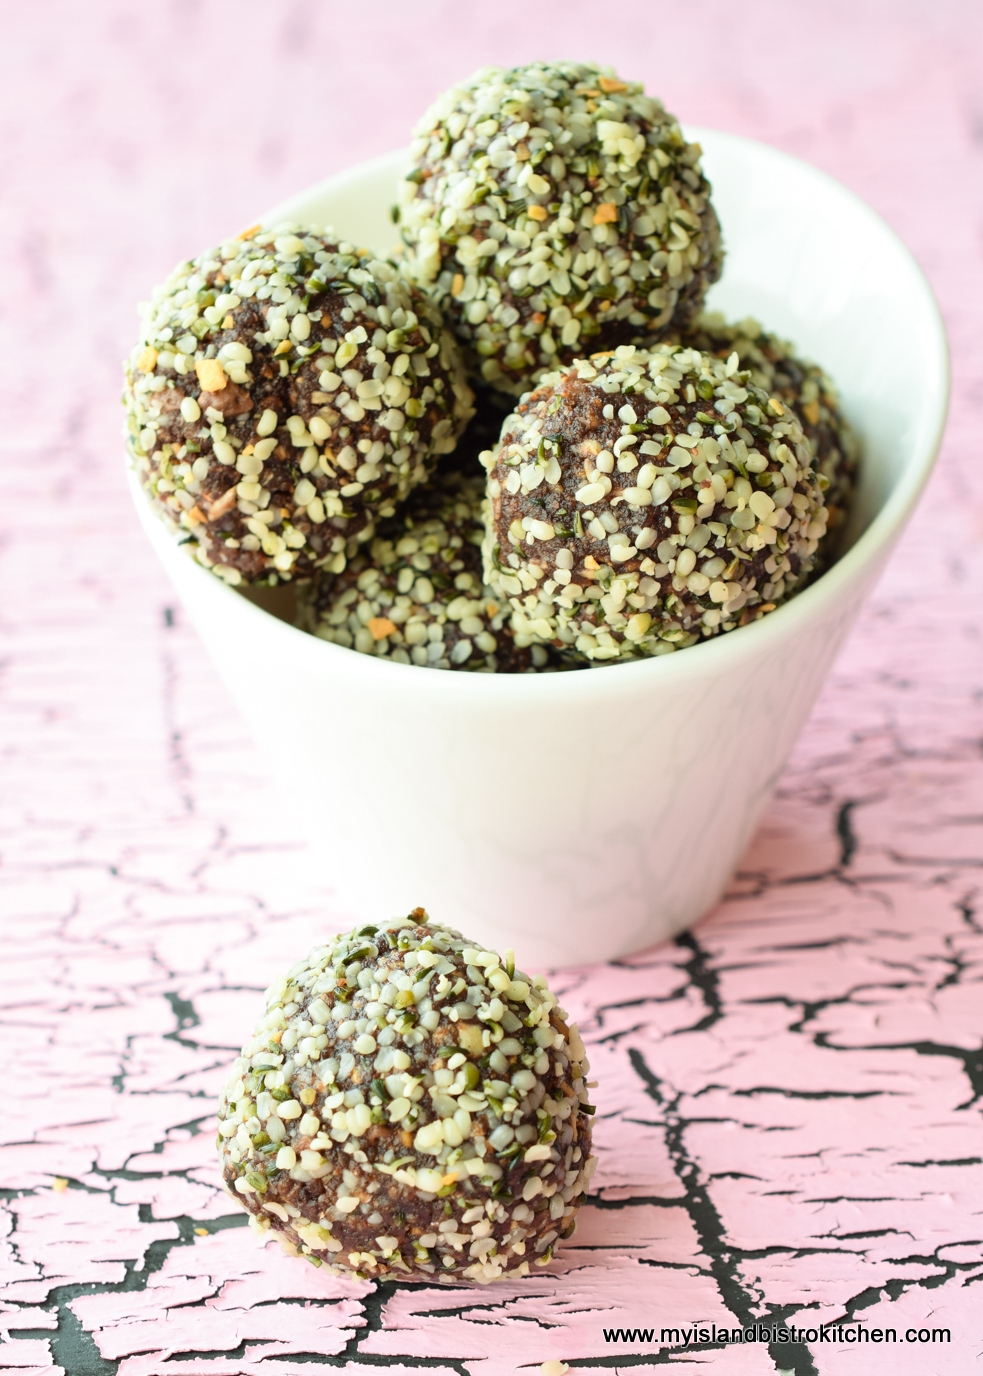 Small white bowl filled with No-bake Chocolate Almond Bliss Balls Rolled in Hemp Hearts set against a pink and gray backdrop